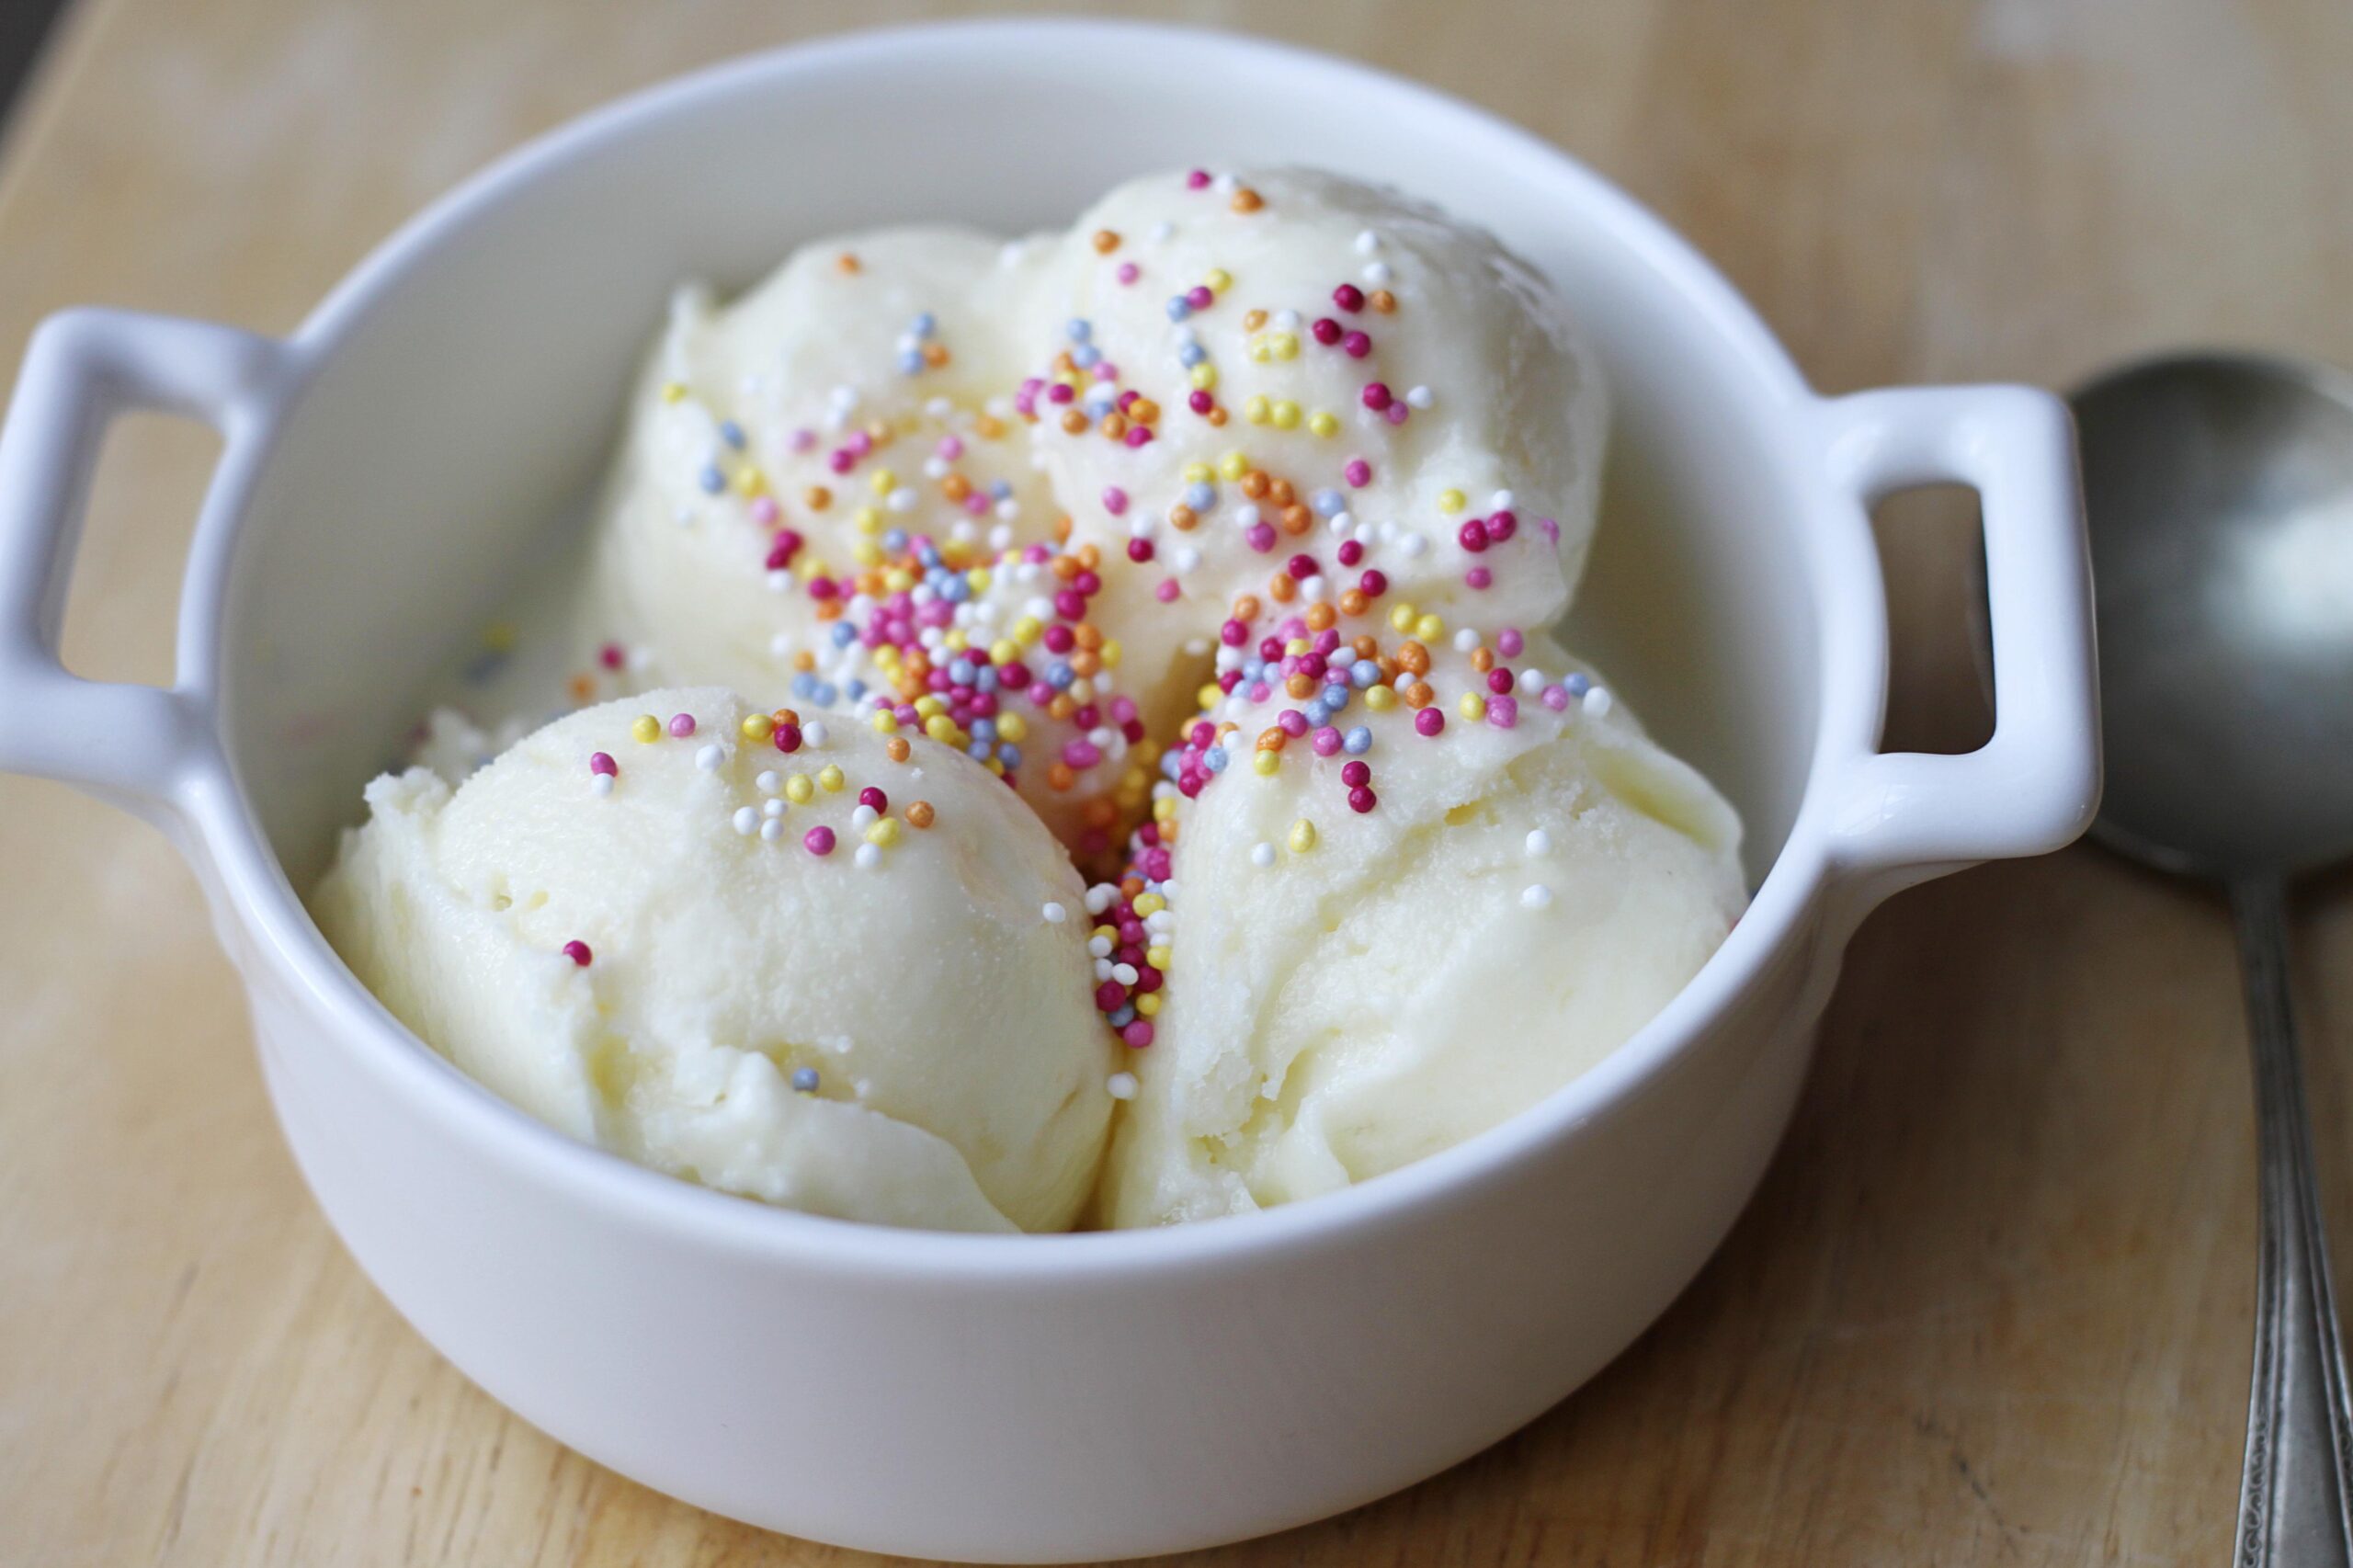  Say goodbye to boring desserts and hello to this magical snow cream creation.